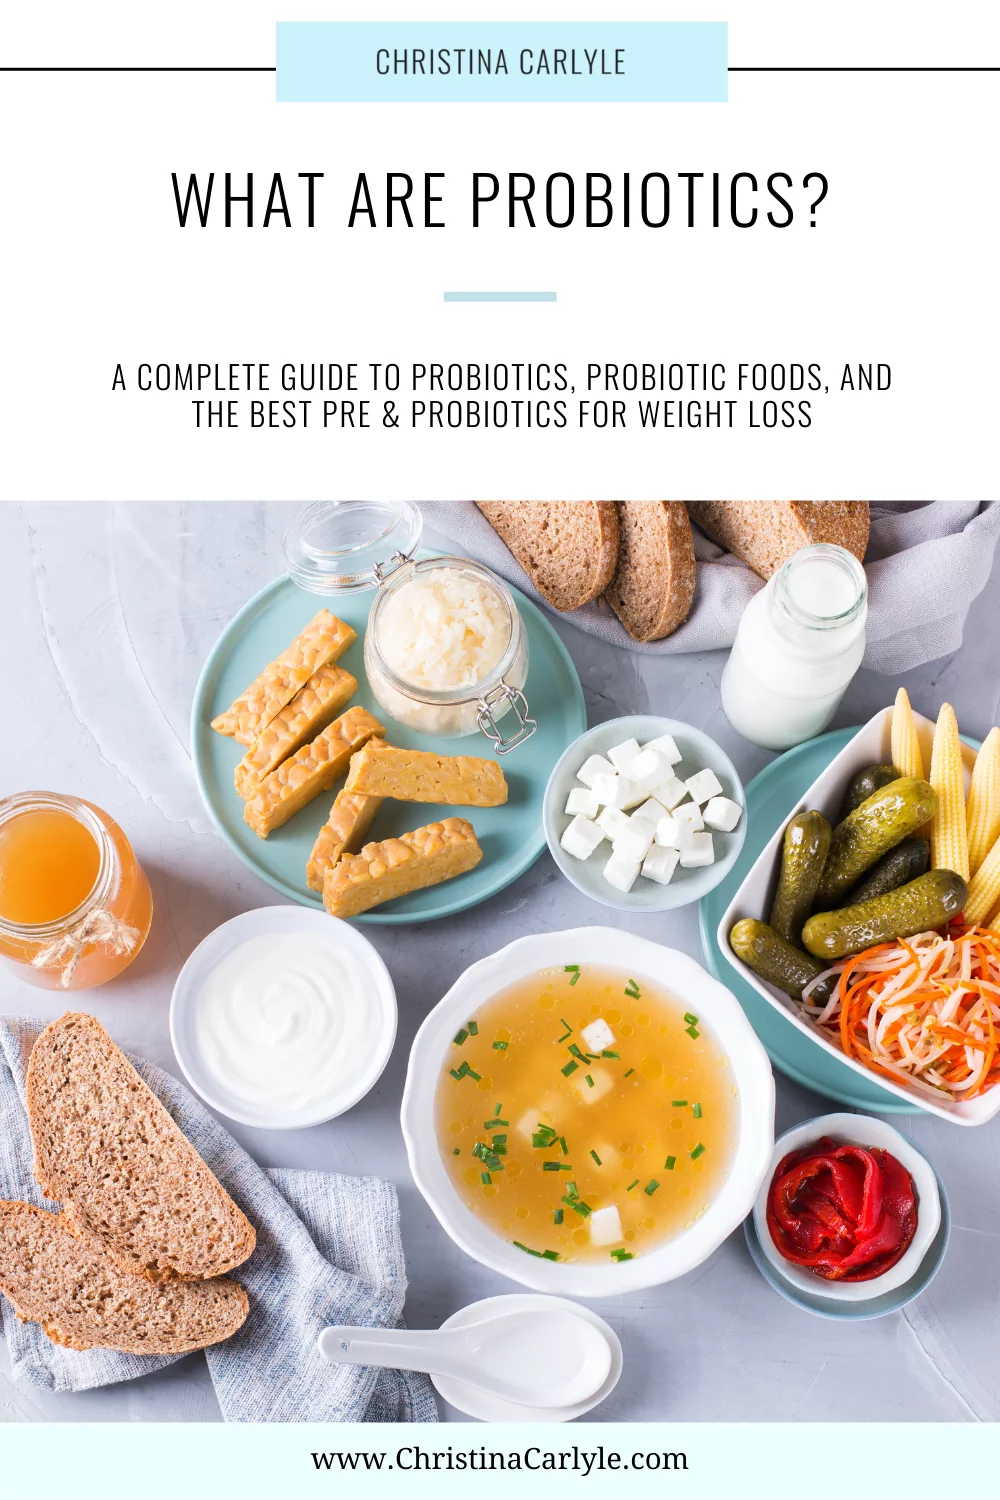 a flay lay of all probiotic foods and text that says "What are Probiotics?"